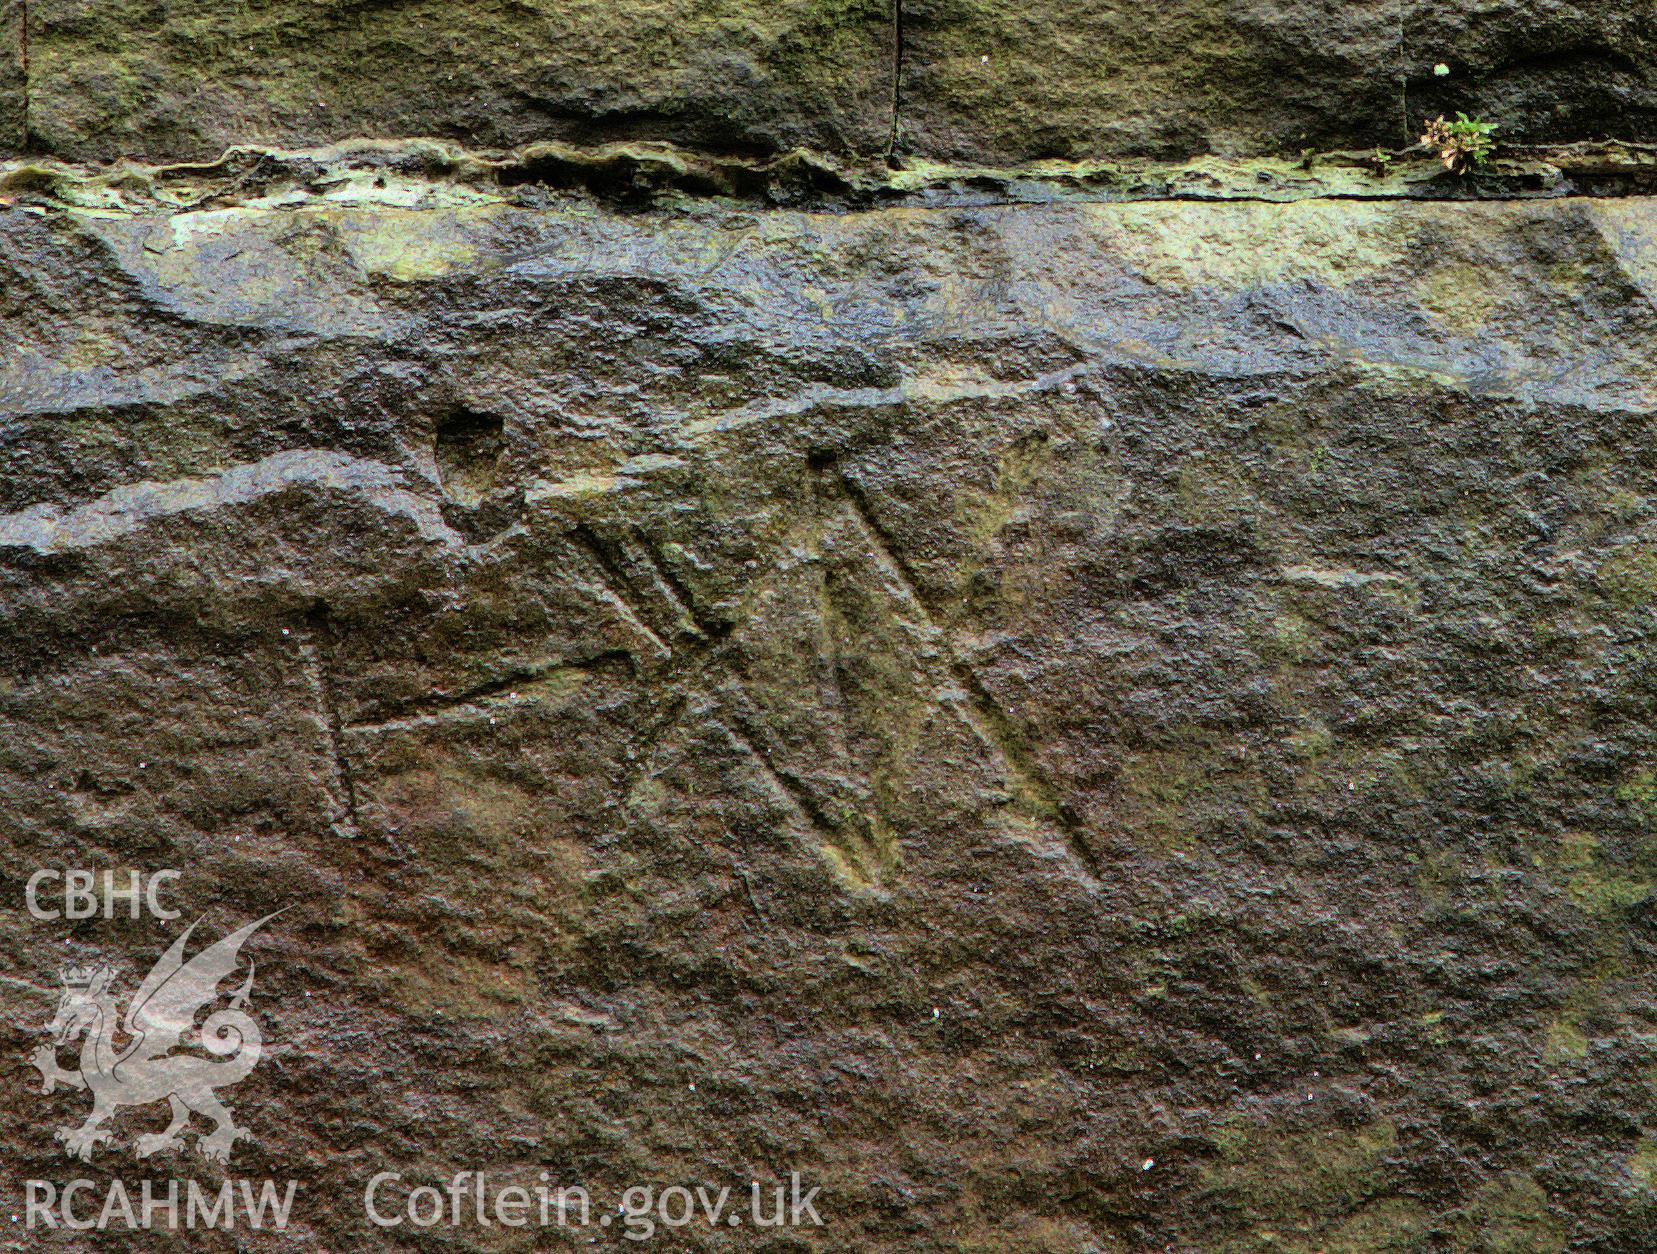 Colour photo showing masons marks on the stone piers of the viaduct, taken by Mark Evans, January 2017.